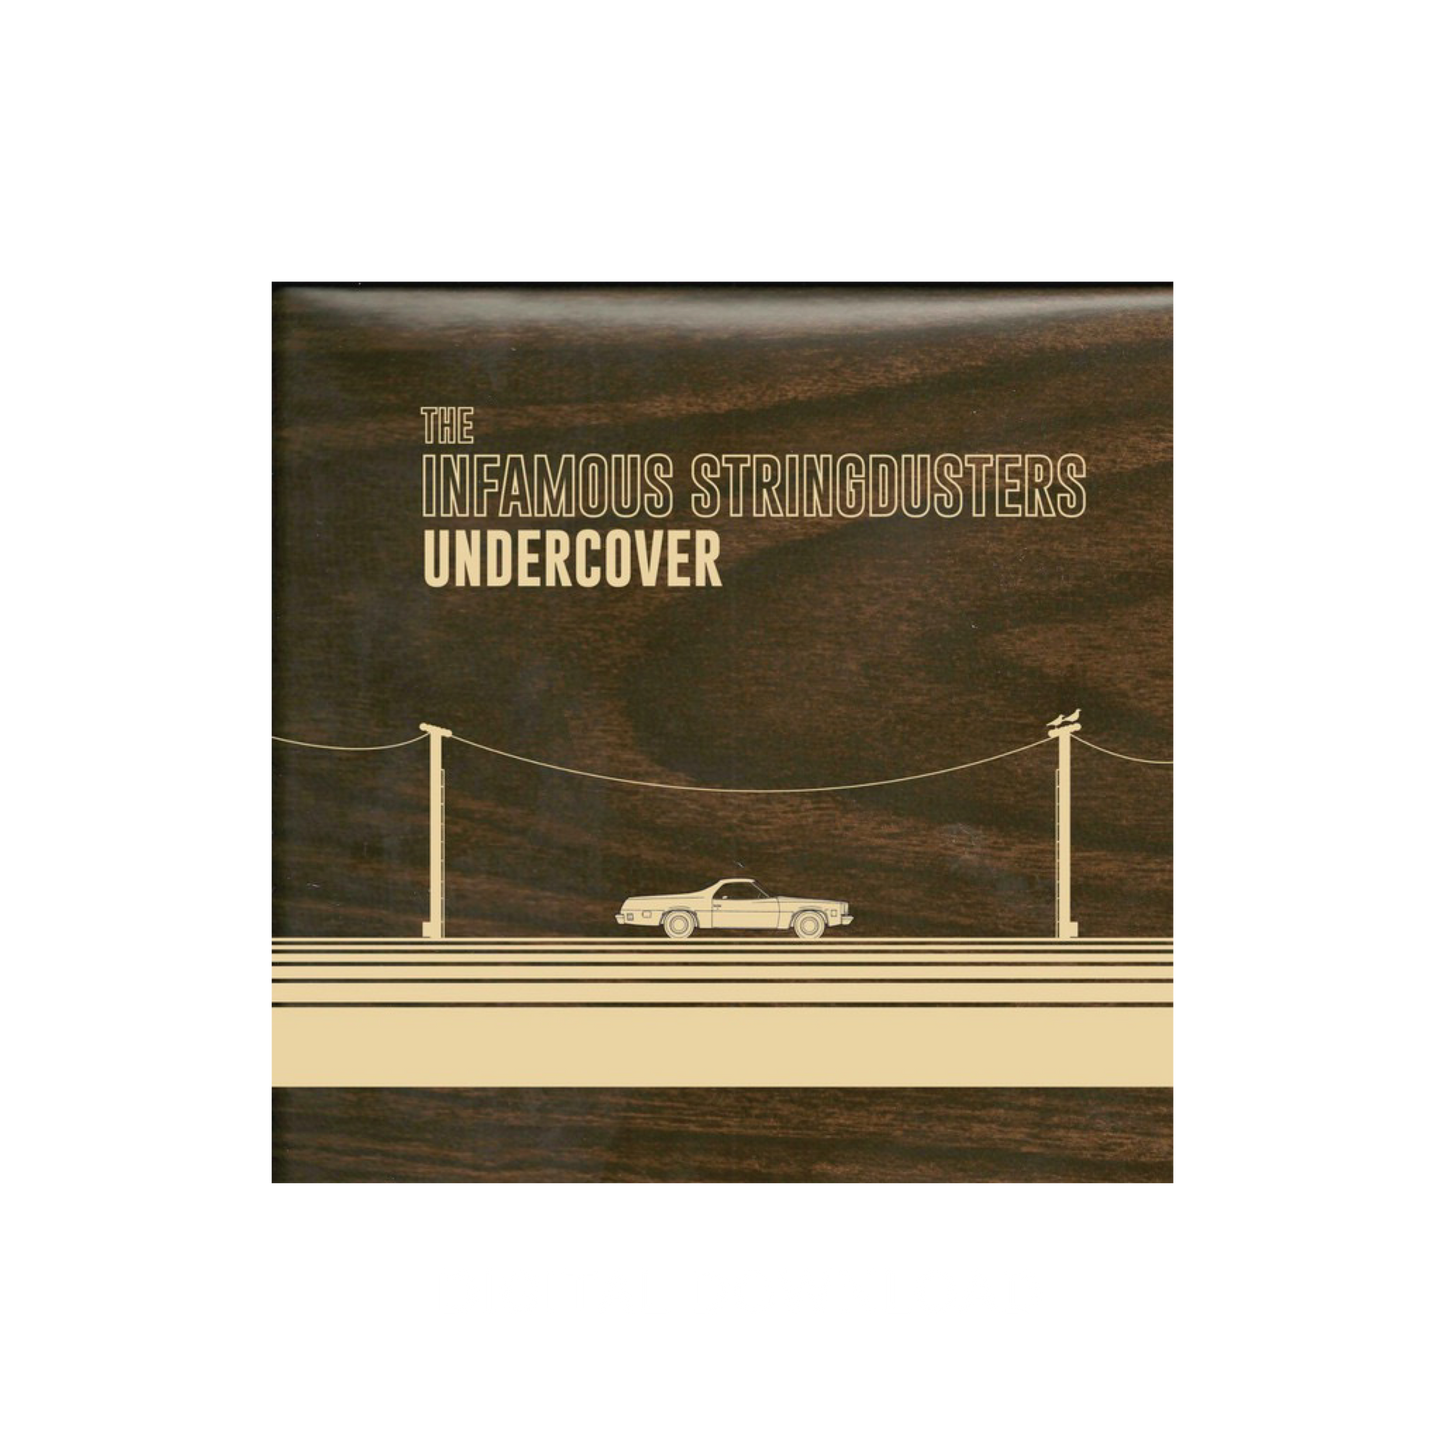 The Infamous Stringdusters - Undercover Digital Download